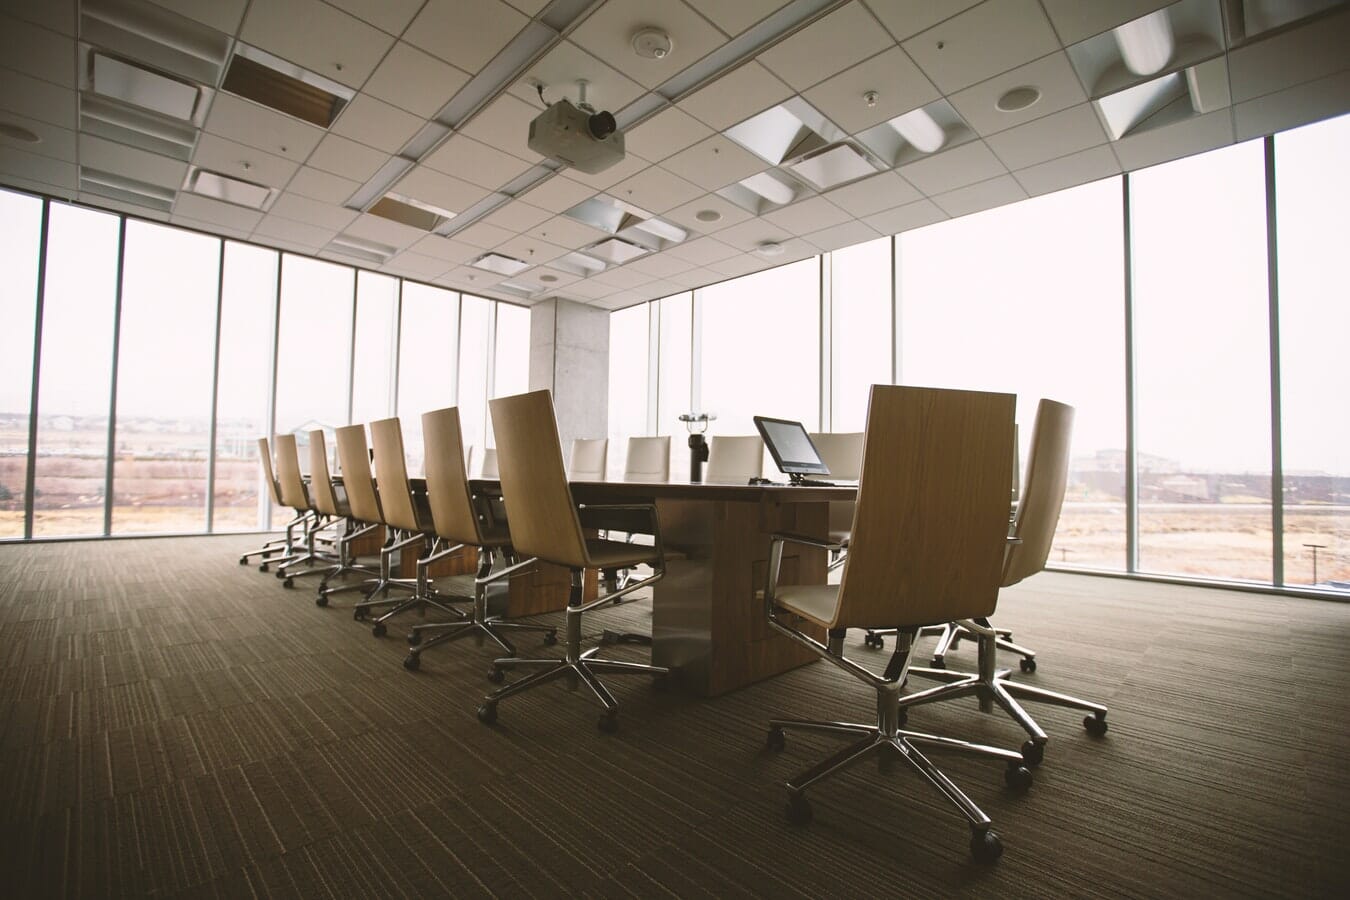 A conference room with Phoenixing chairs.